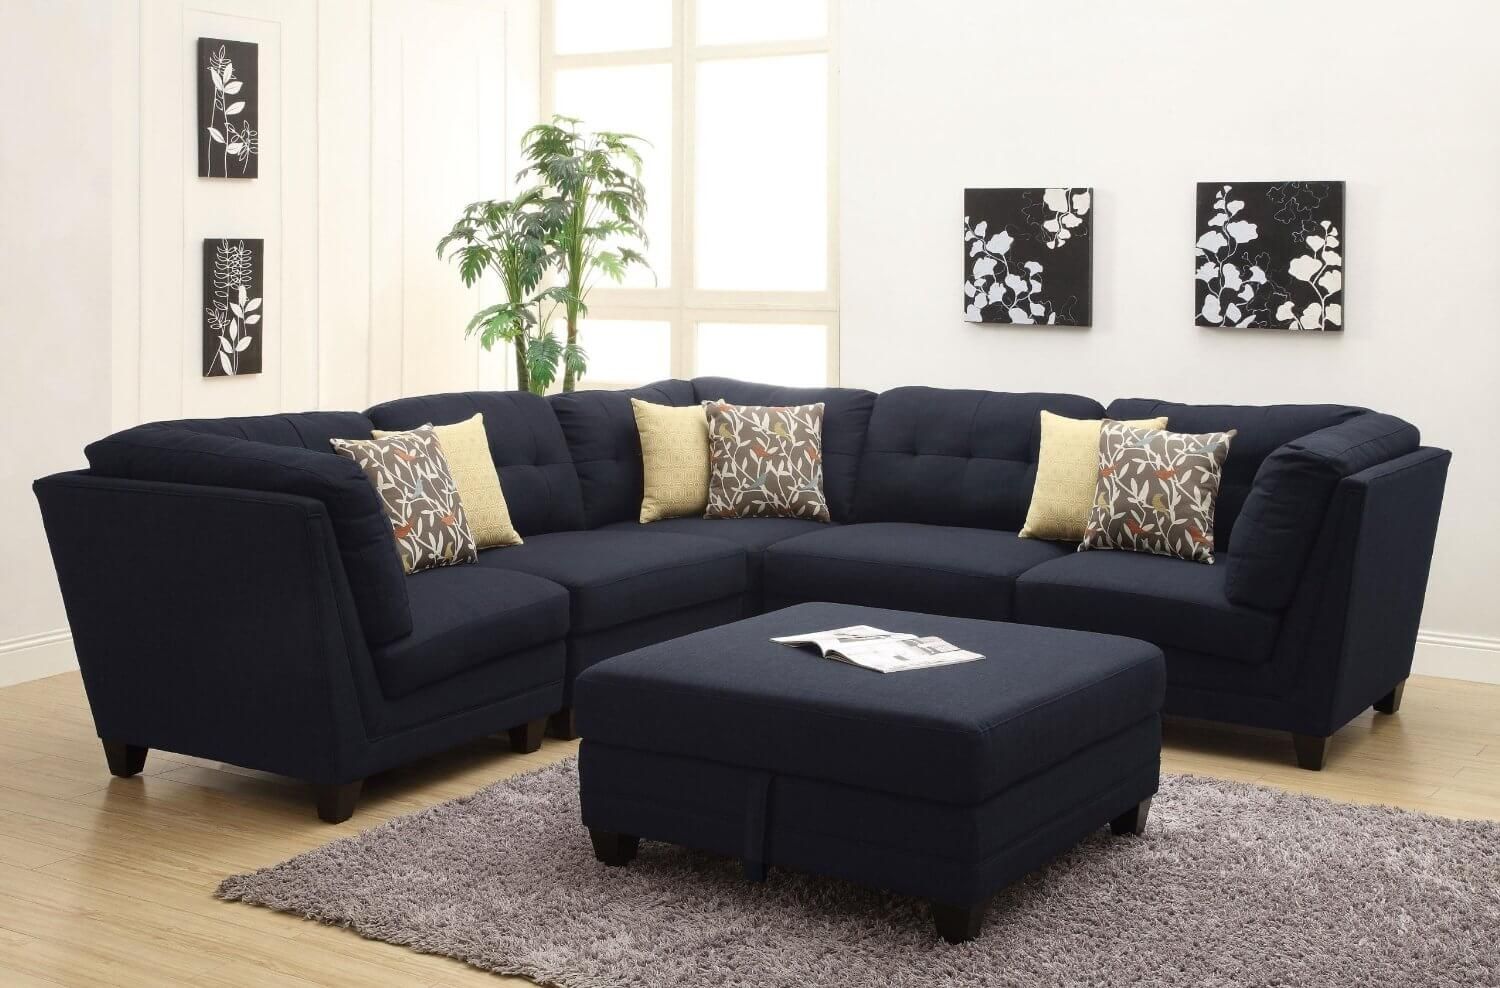 100 Beautiful Sectional Sofas Under 1000 With Regard To Comfortable Sofas And Chairs (View 10 of 15)